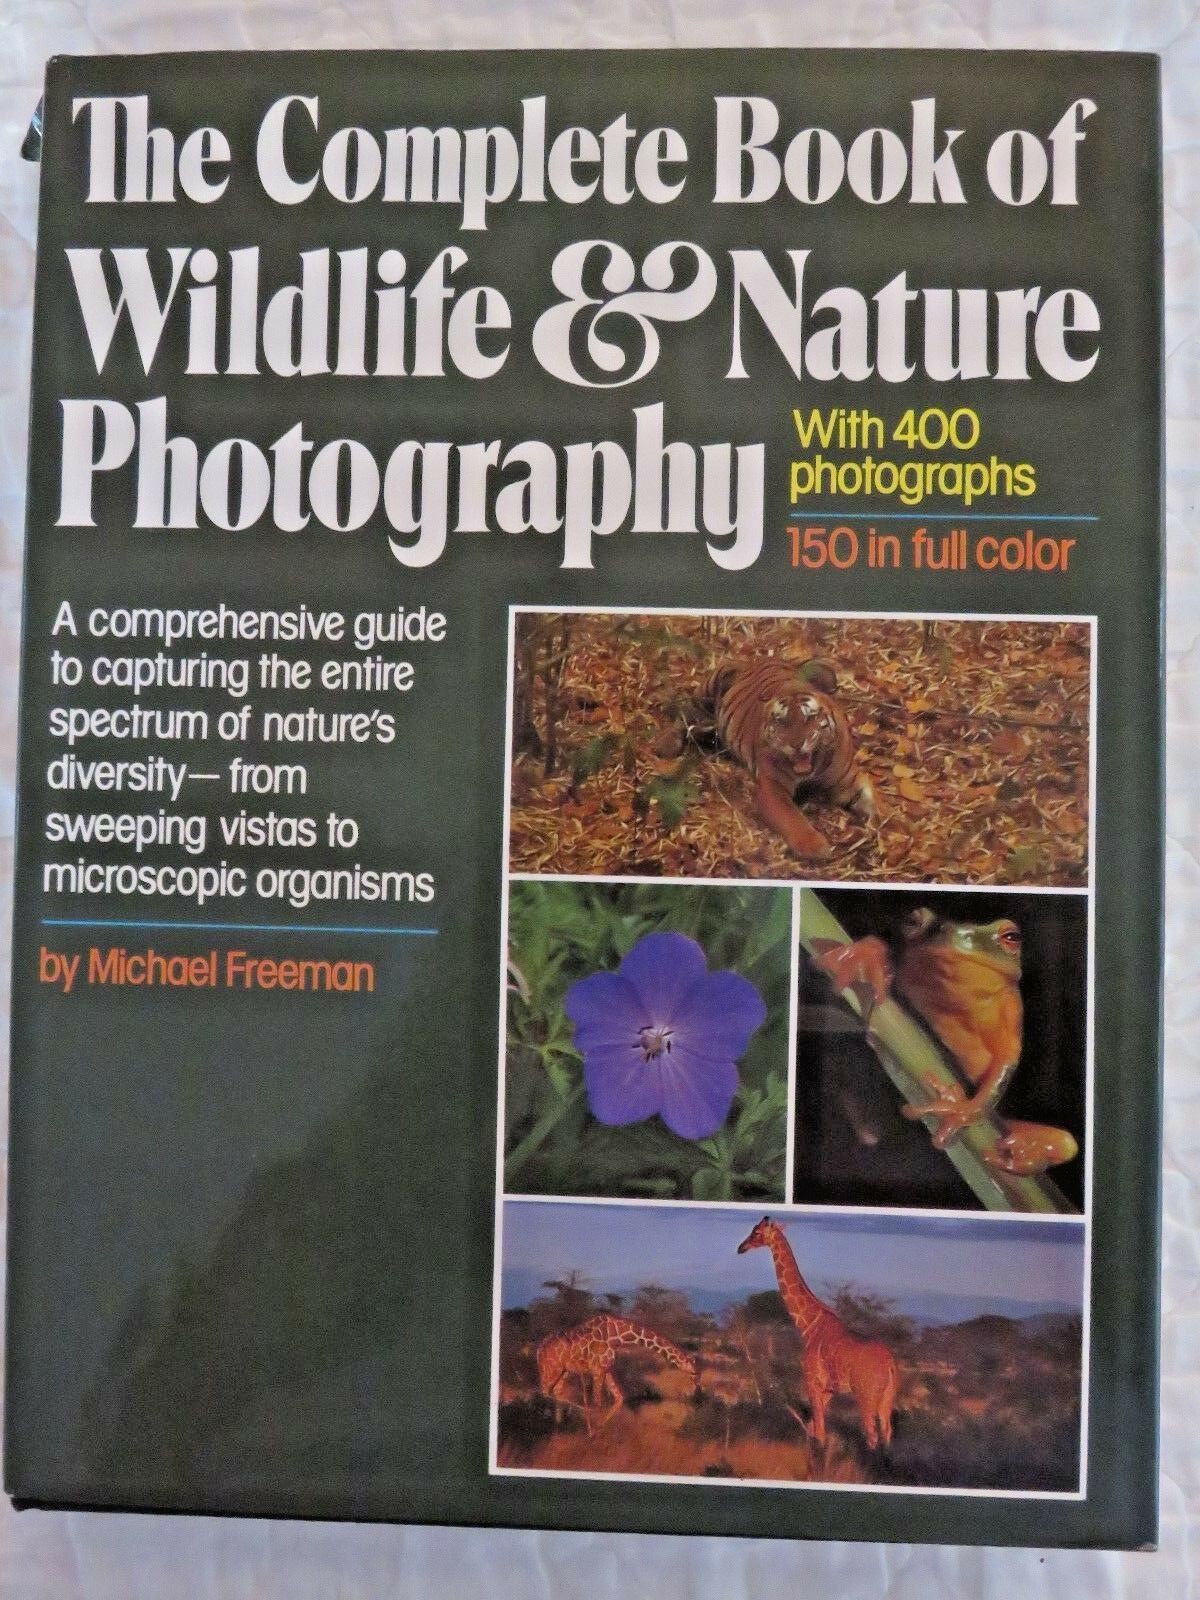 The Complete Book Of Wildlife & Nature Photography By Michael Freeman